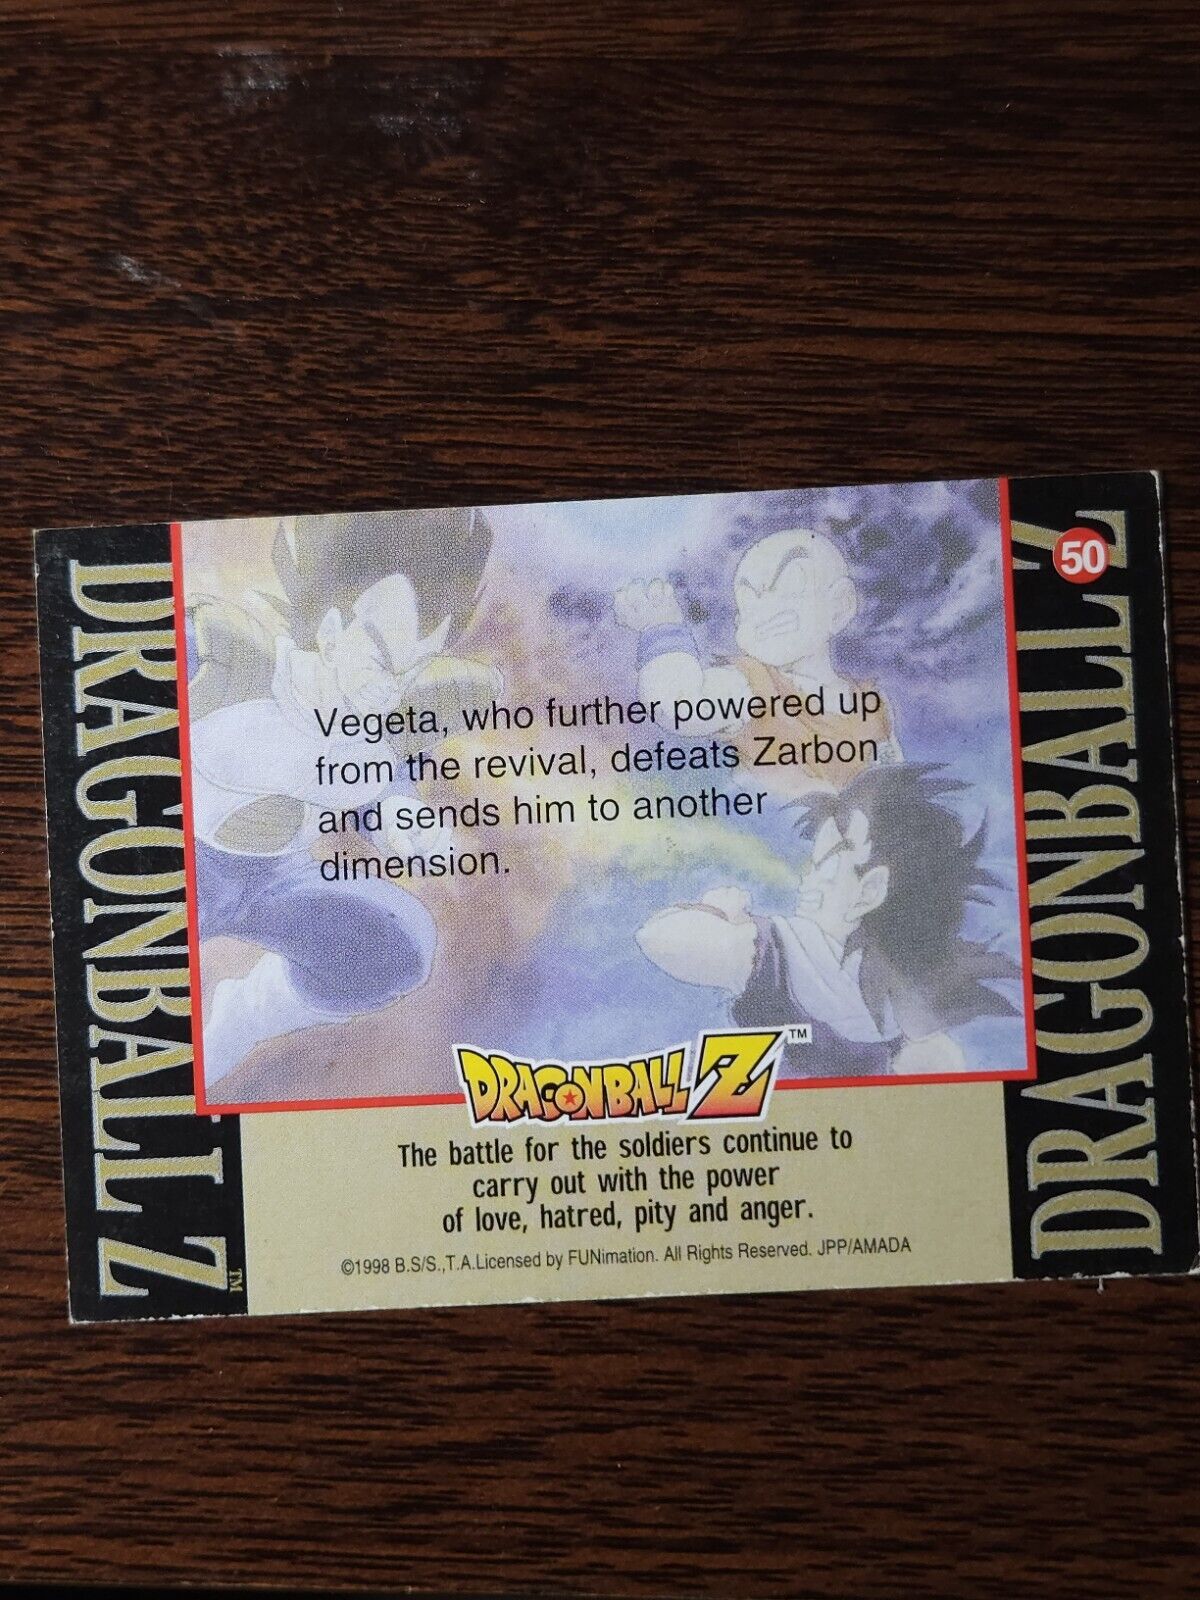 Dragon Ball Z "IS IT DEFEAT OR VICTORY THAT WAITS IN THE DARK?" #50 Trading Card Errors & Oddities